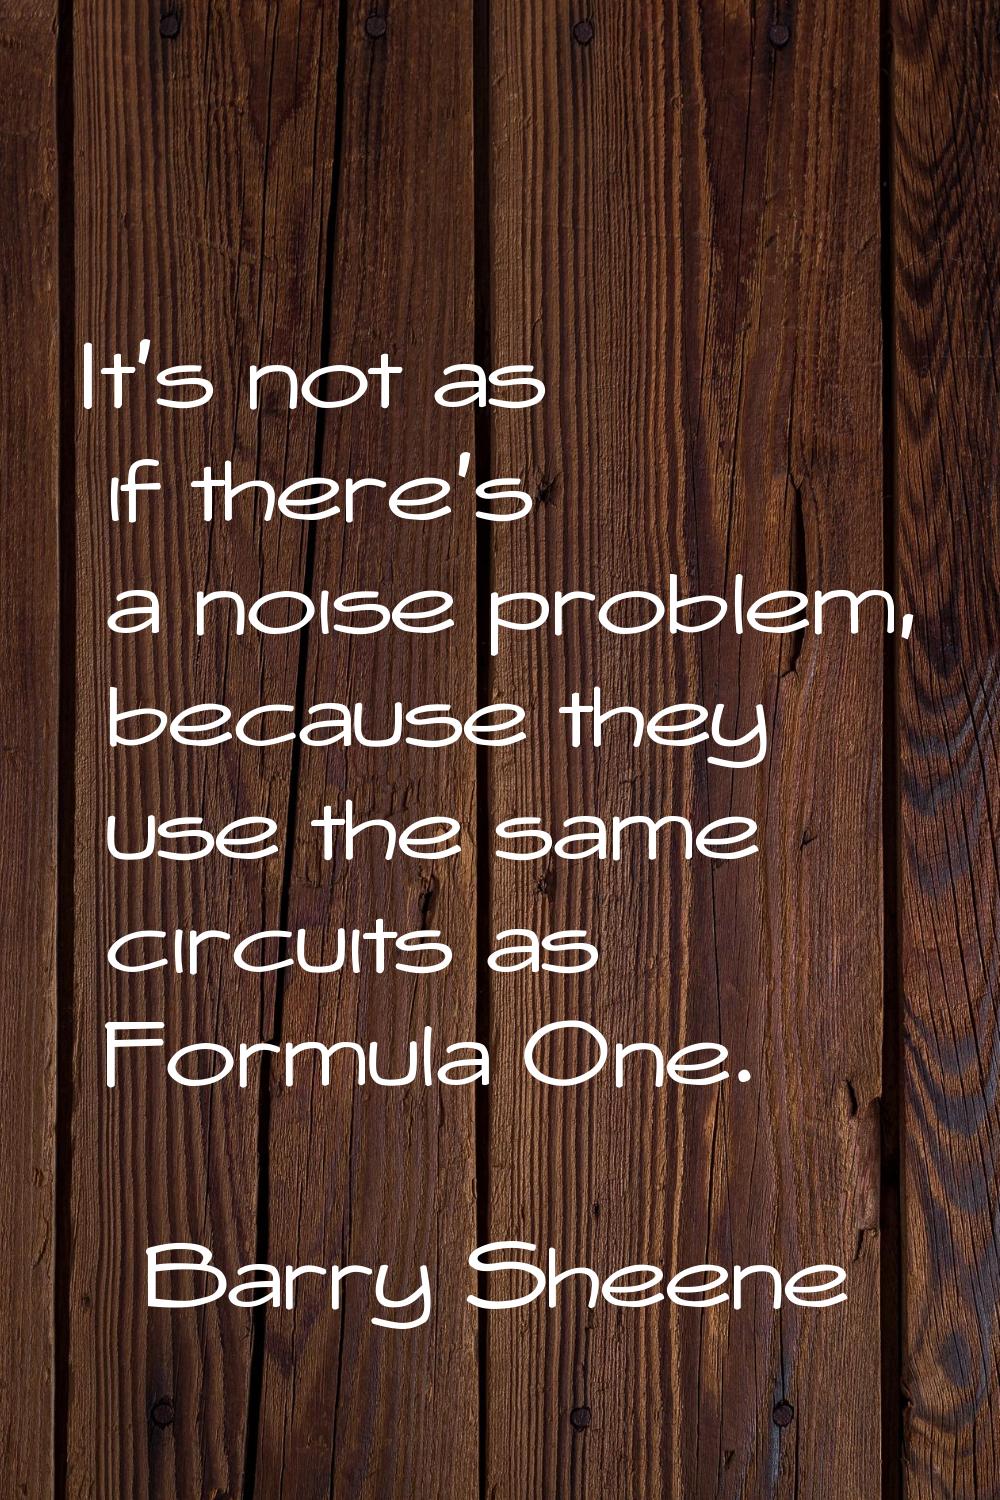 It's not as if there's a noise problem, because they use the same circuits as Formula One.